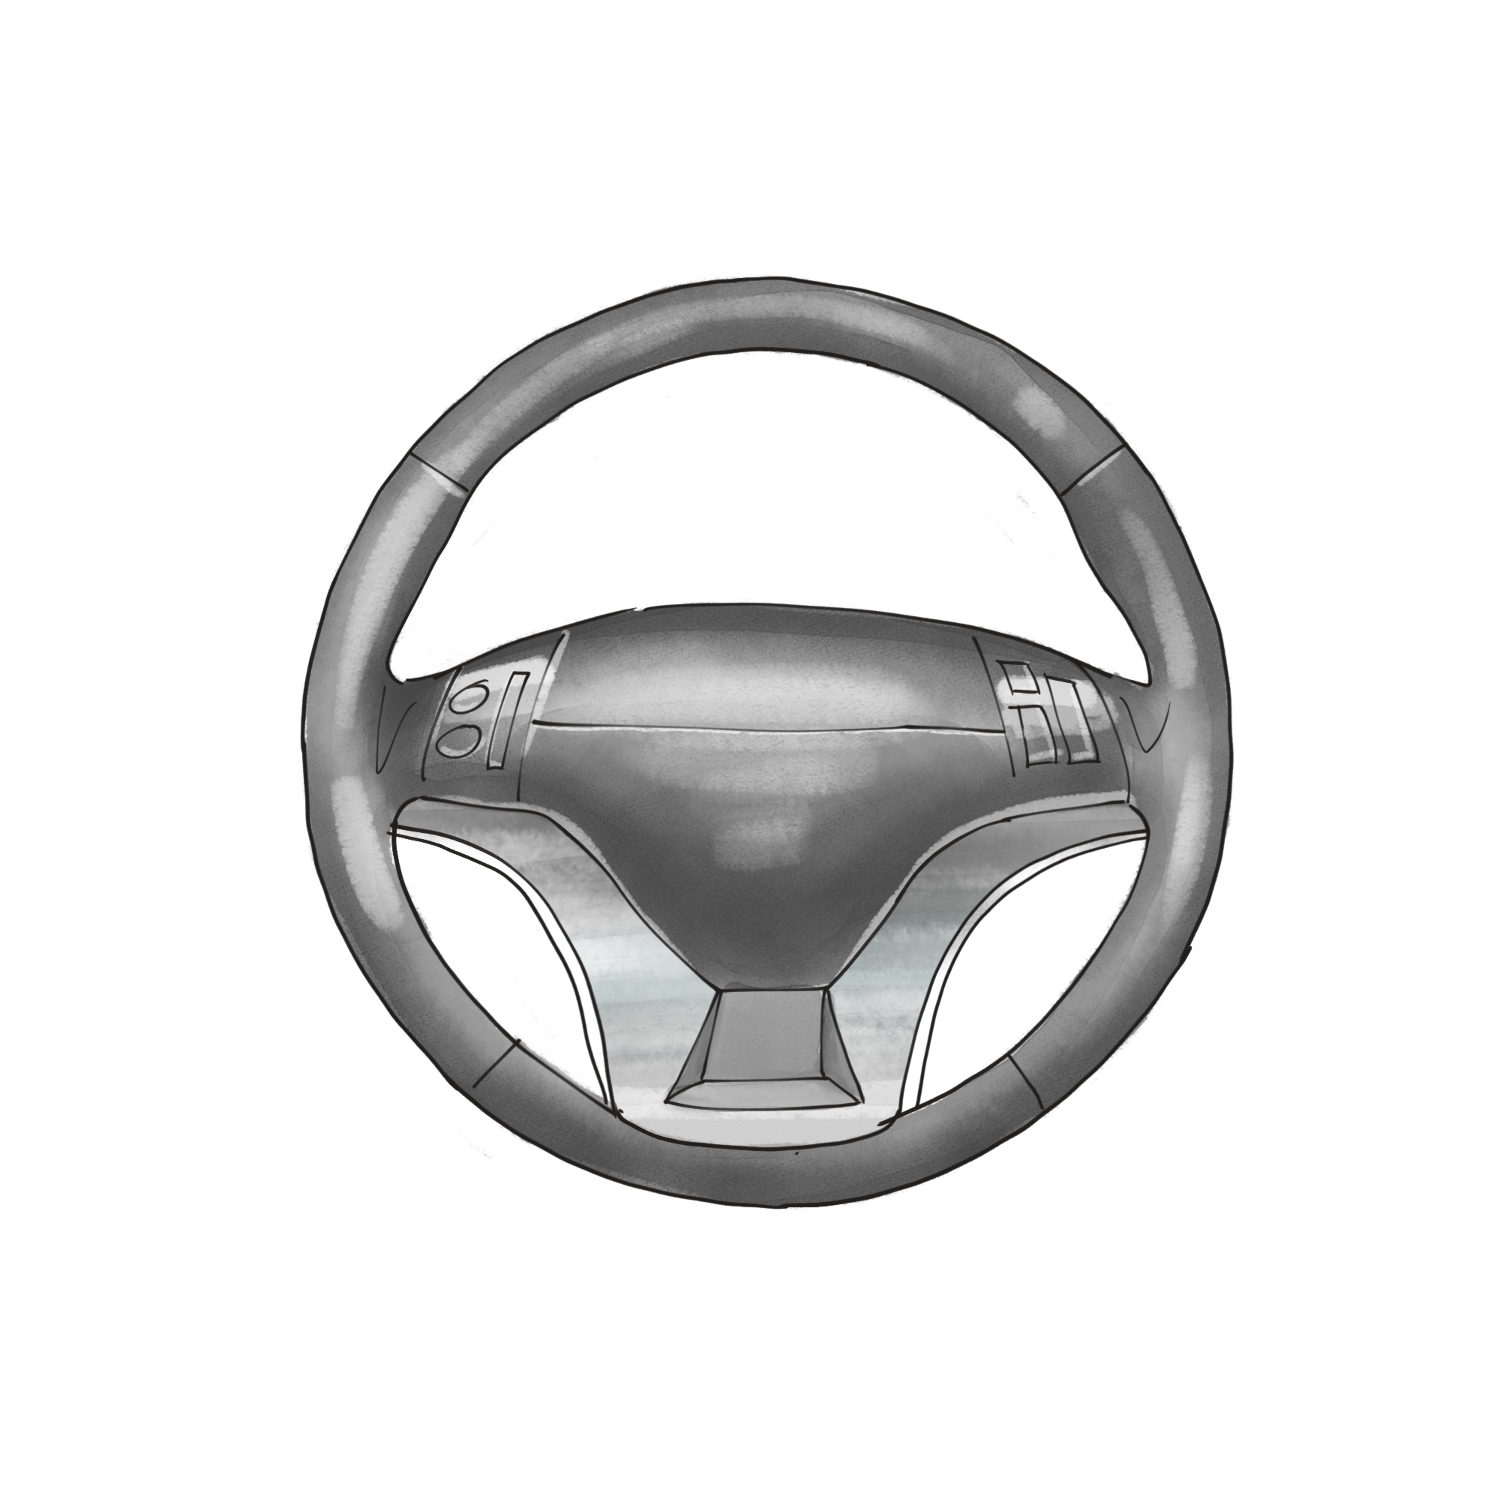  Product image 1 of the product “OX Steering wheel Comfort ”